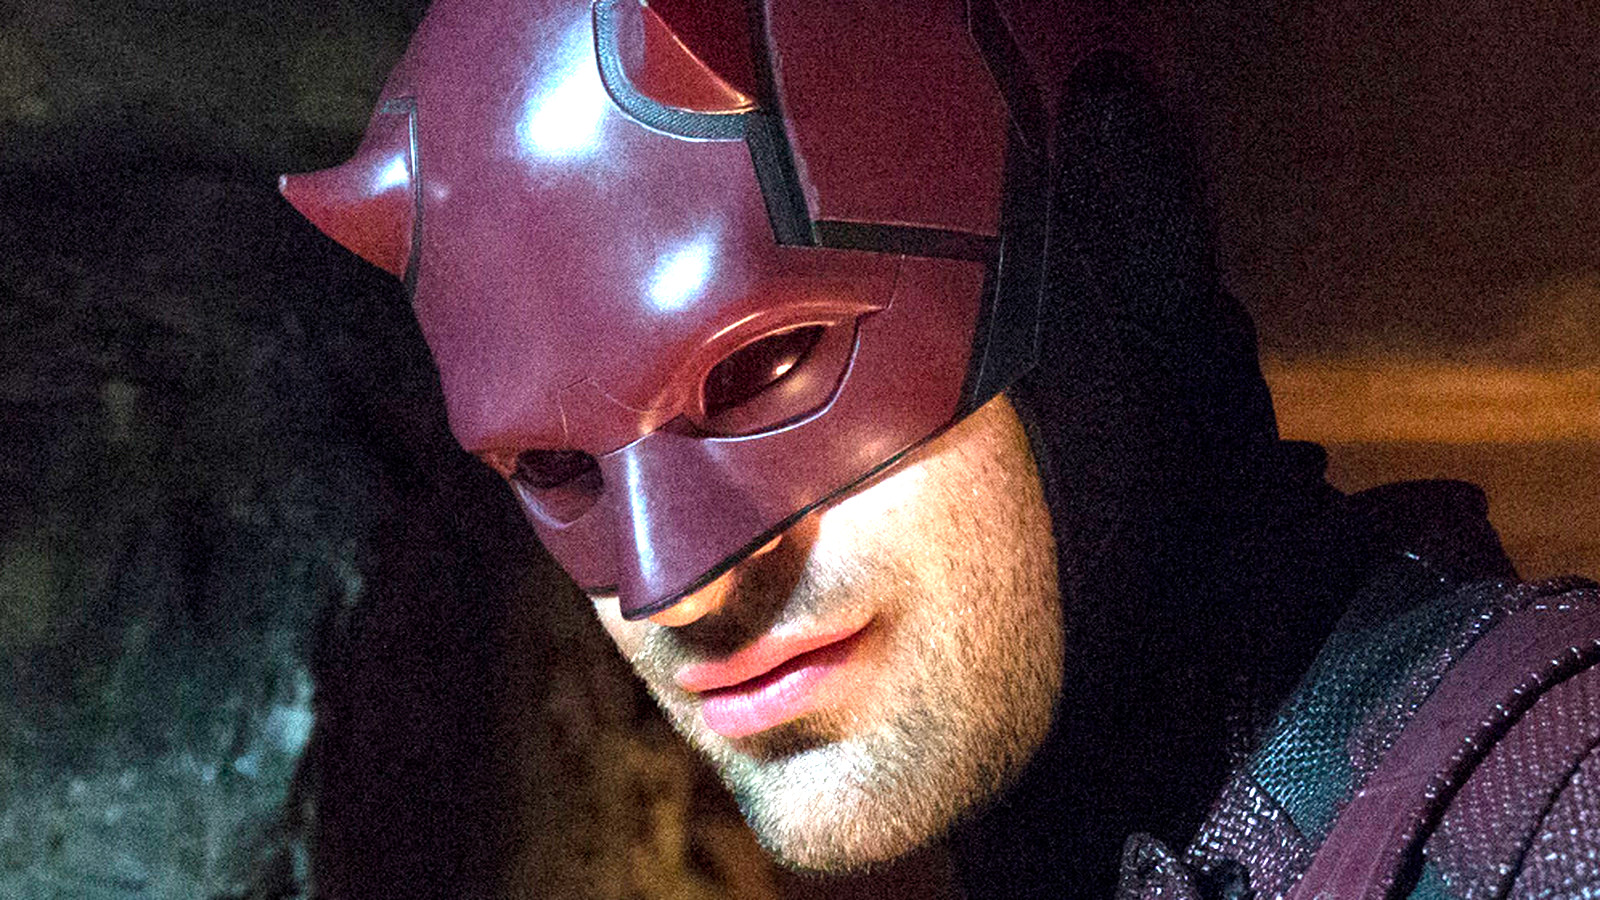 Charlie Cox in character as Daredevil, his face in semi-profile